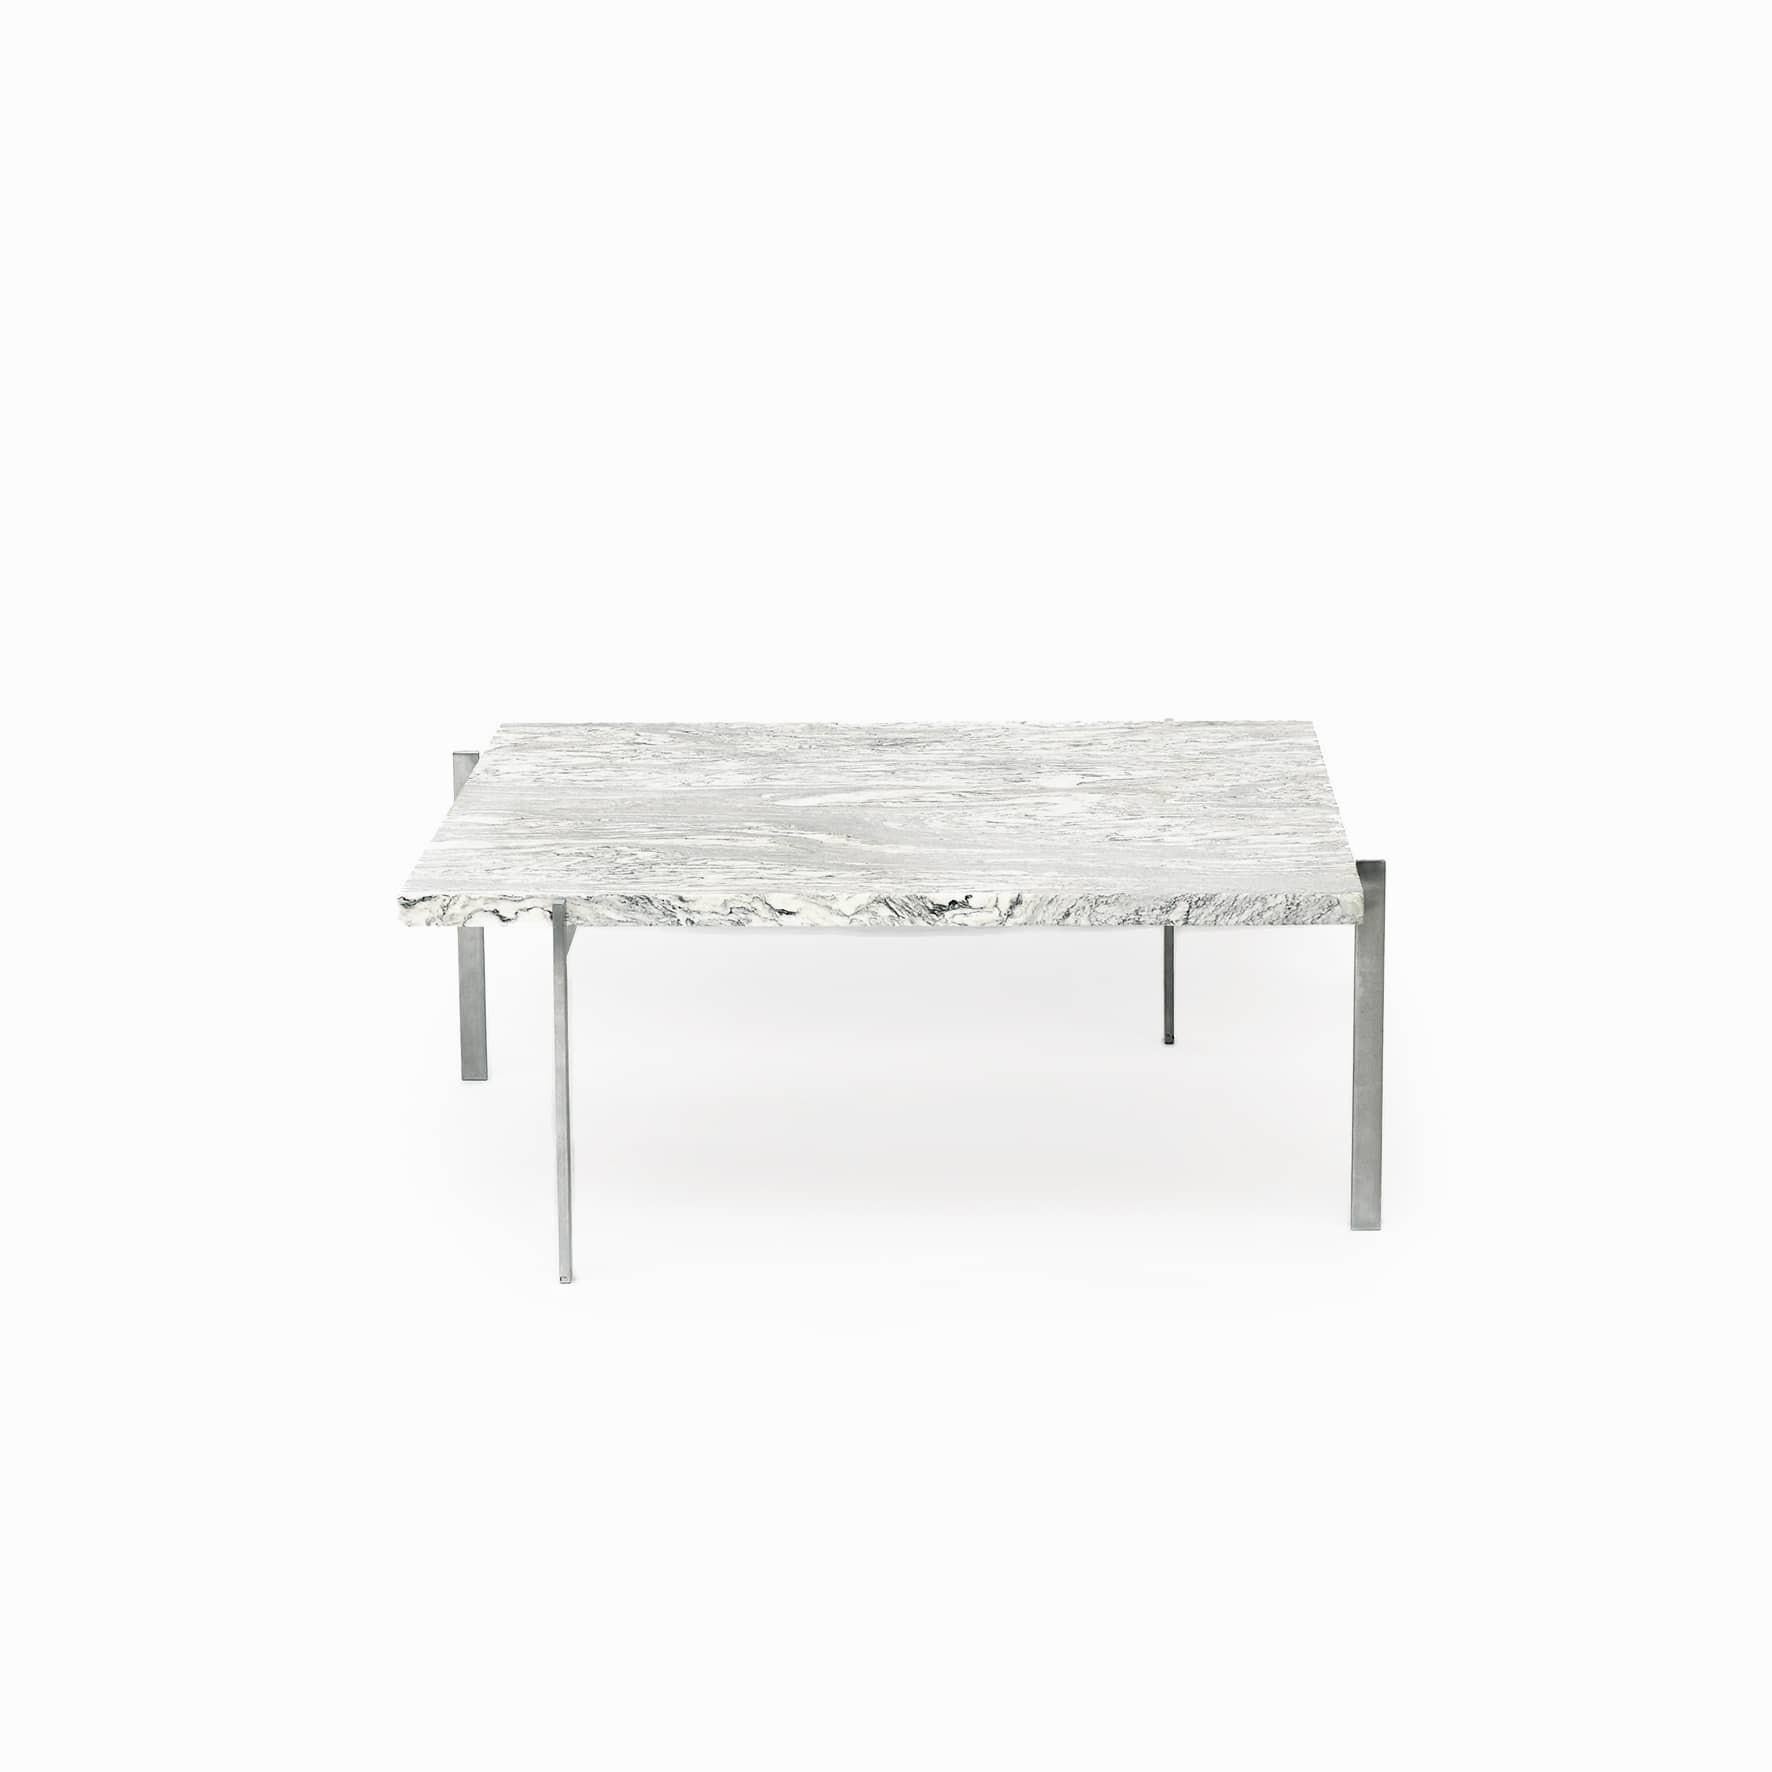 Poul Kjærholm 1929 - 1980.
Coffee table PK 61, design 1956.
Made of matt steel, beautiful table top in flint-rolled Cipollini marble.

Produced by Kold Christensen, brand of this.